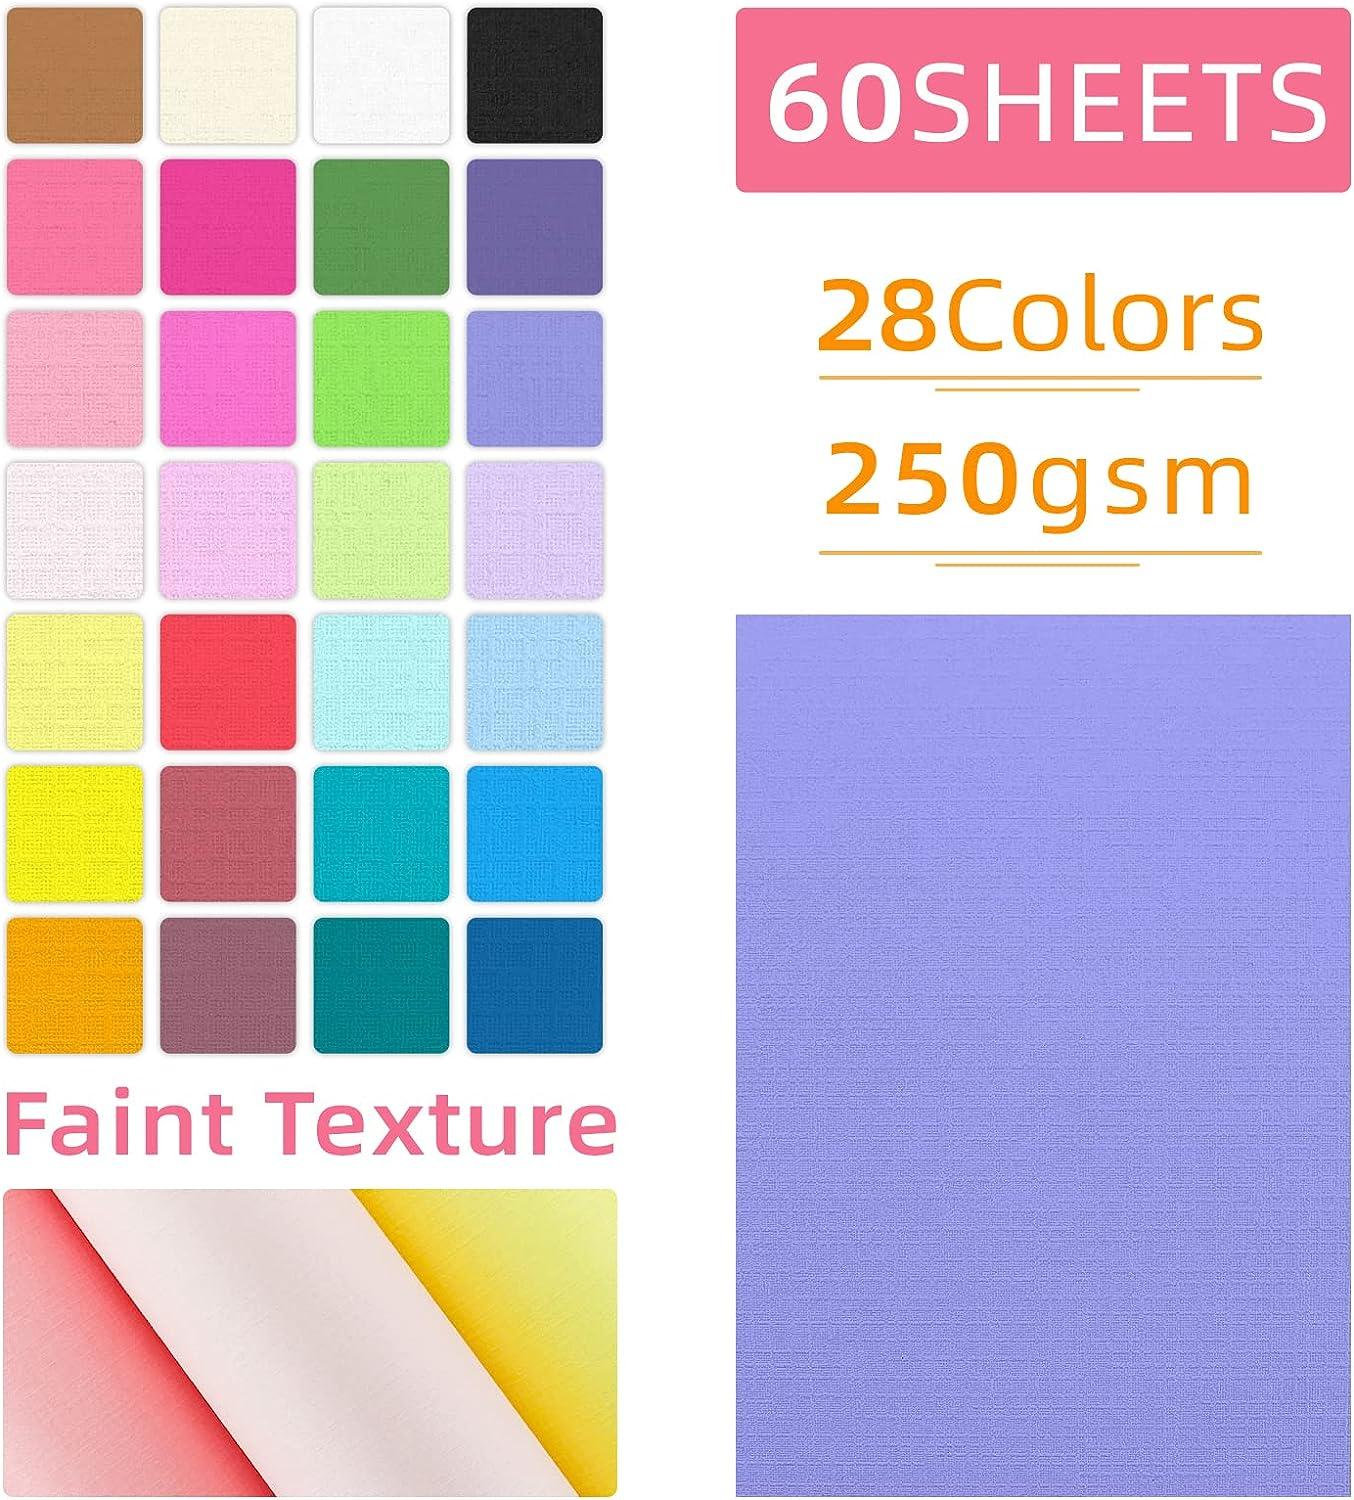 60 Sheets Textured Colorful Card Stock 28 Multicolor Cardstock